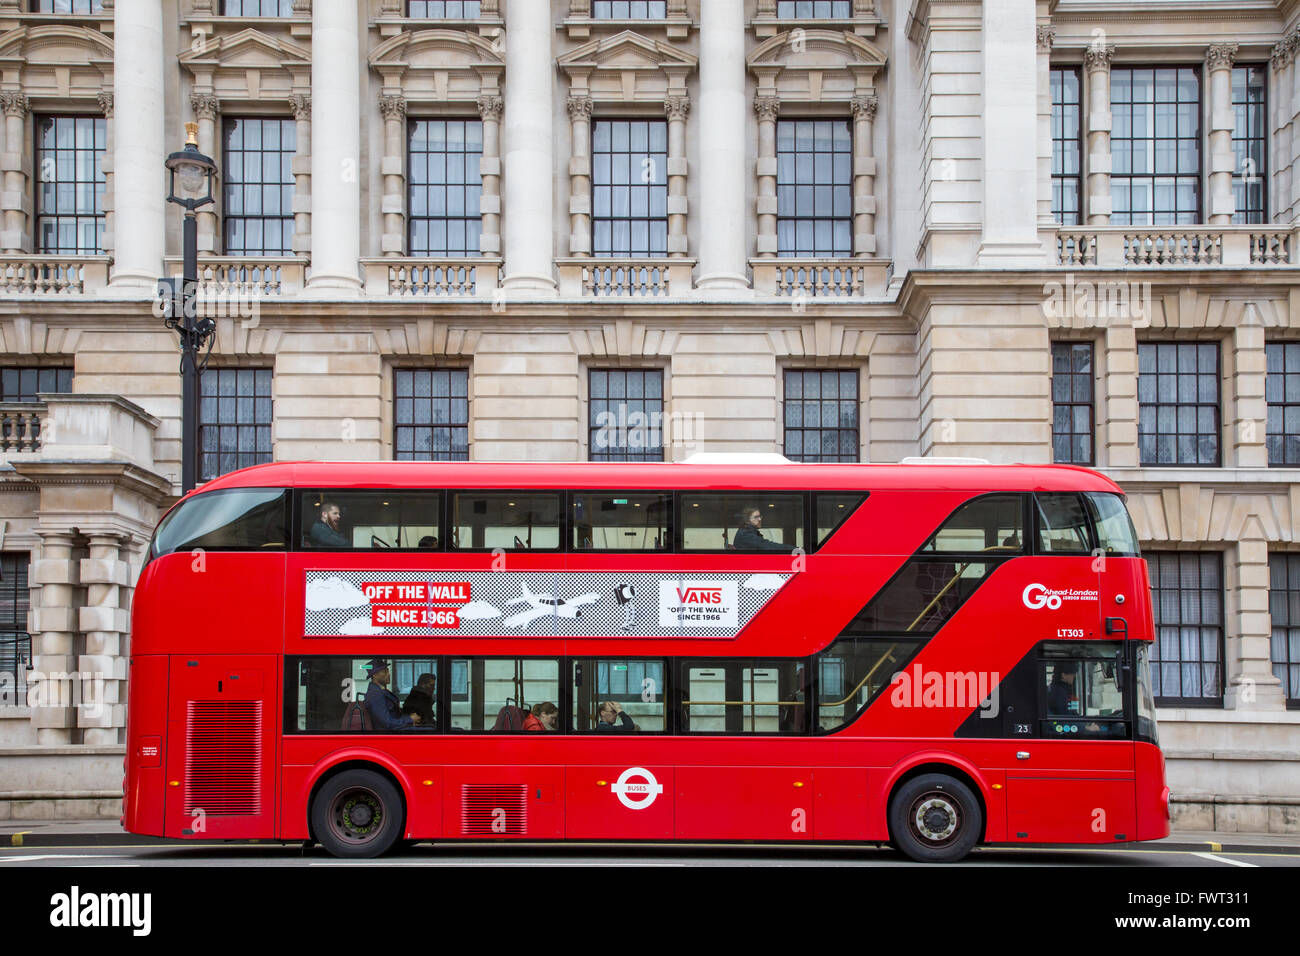 London New Routemaster double-decker red bus Stock Photo